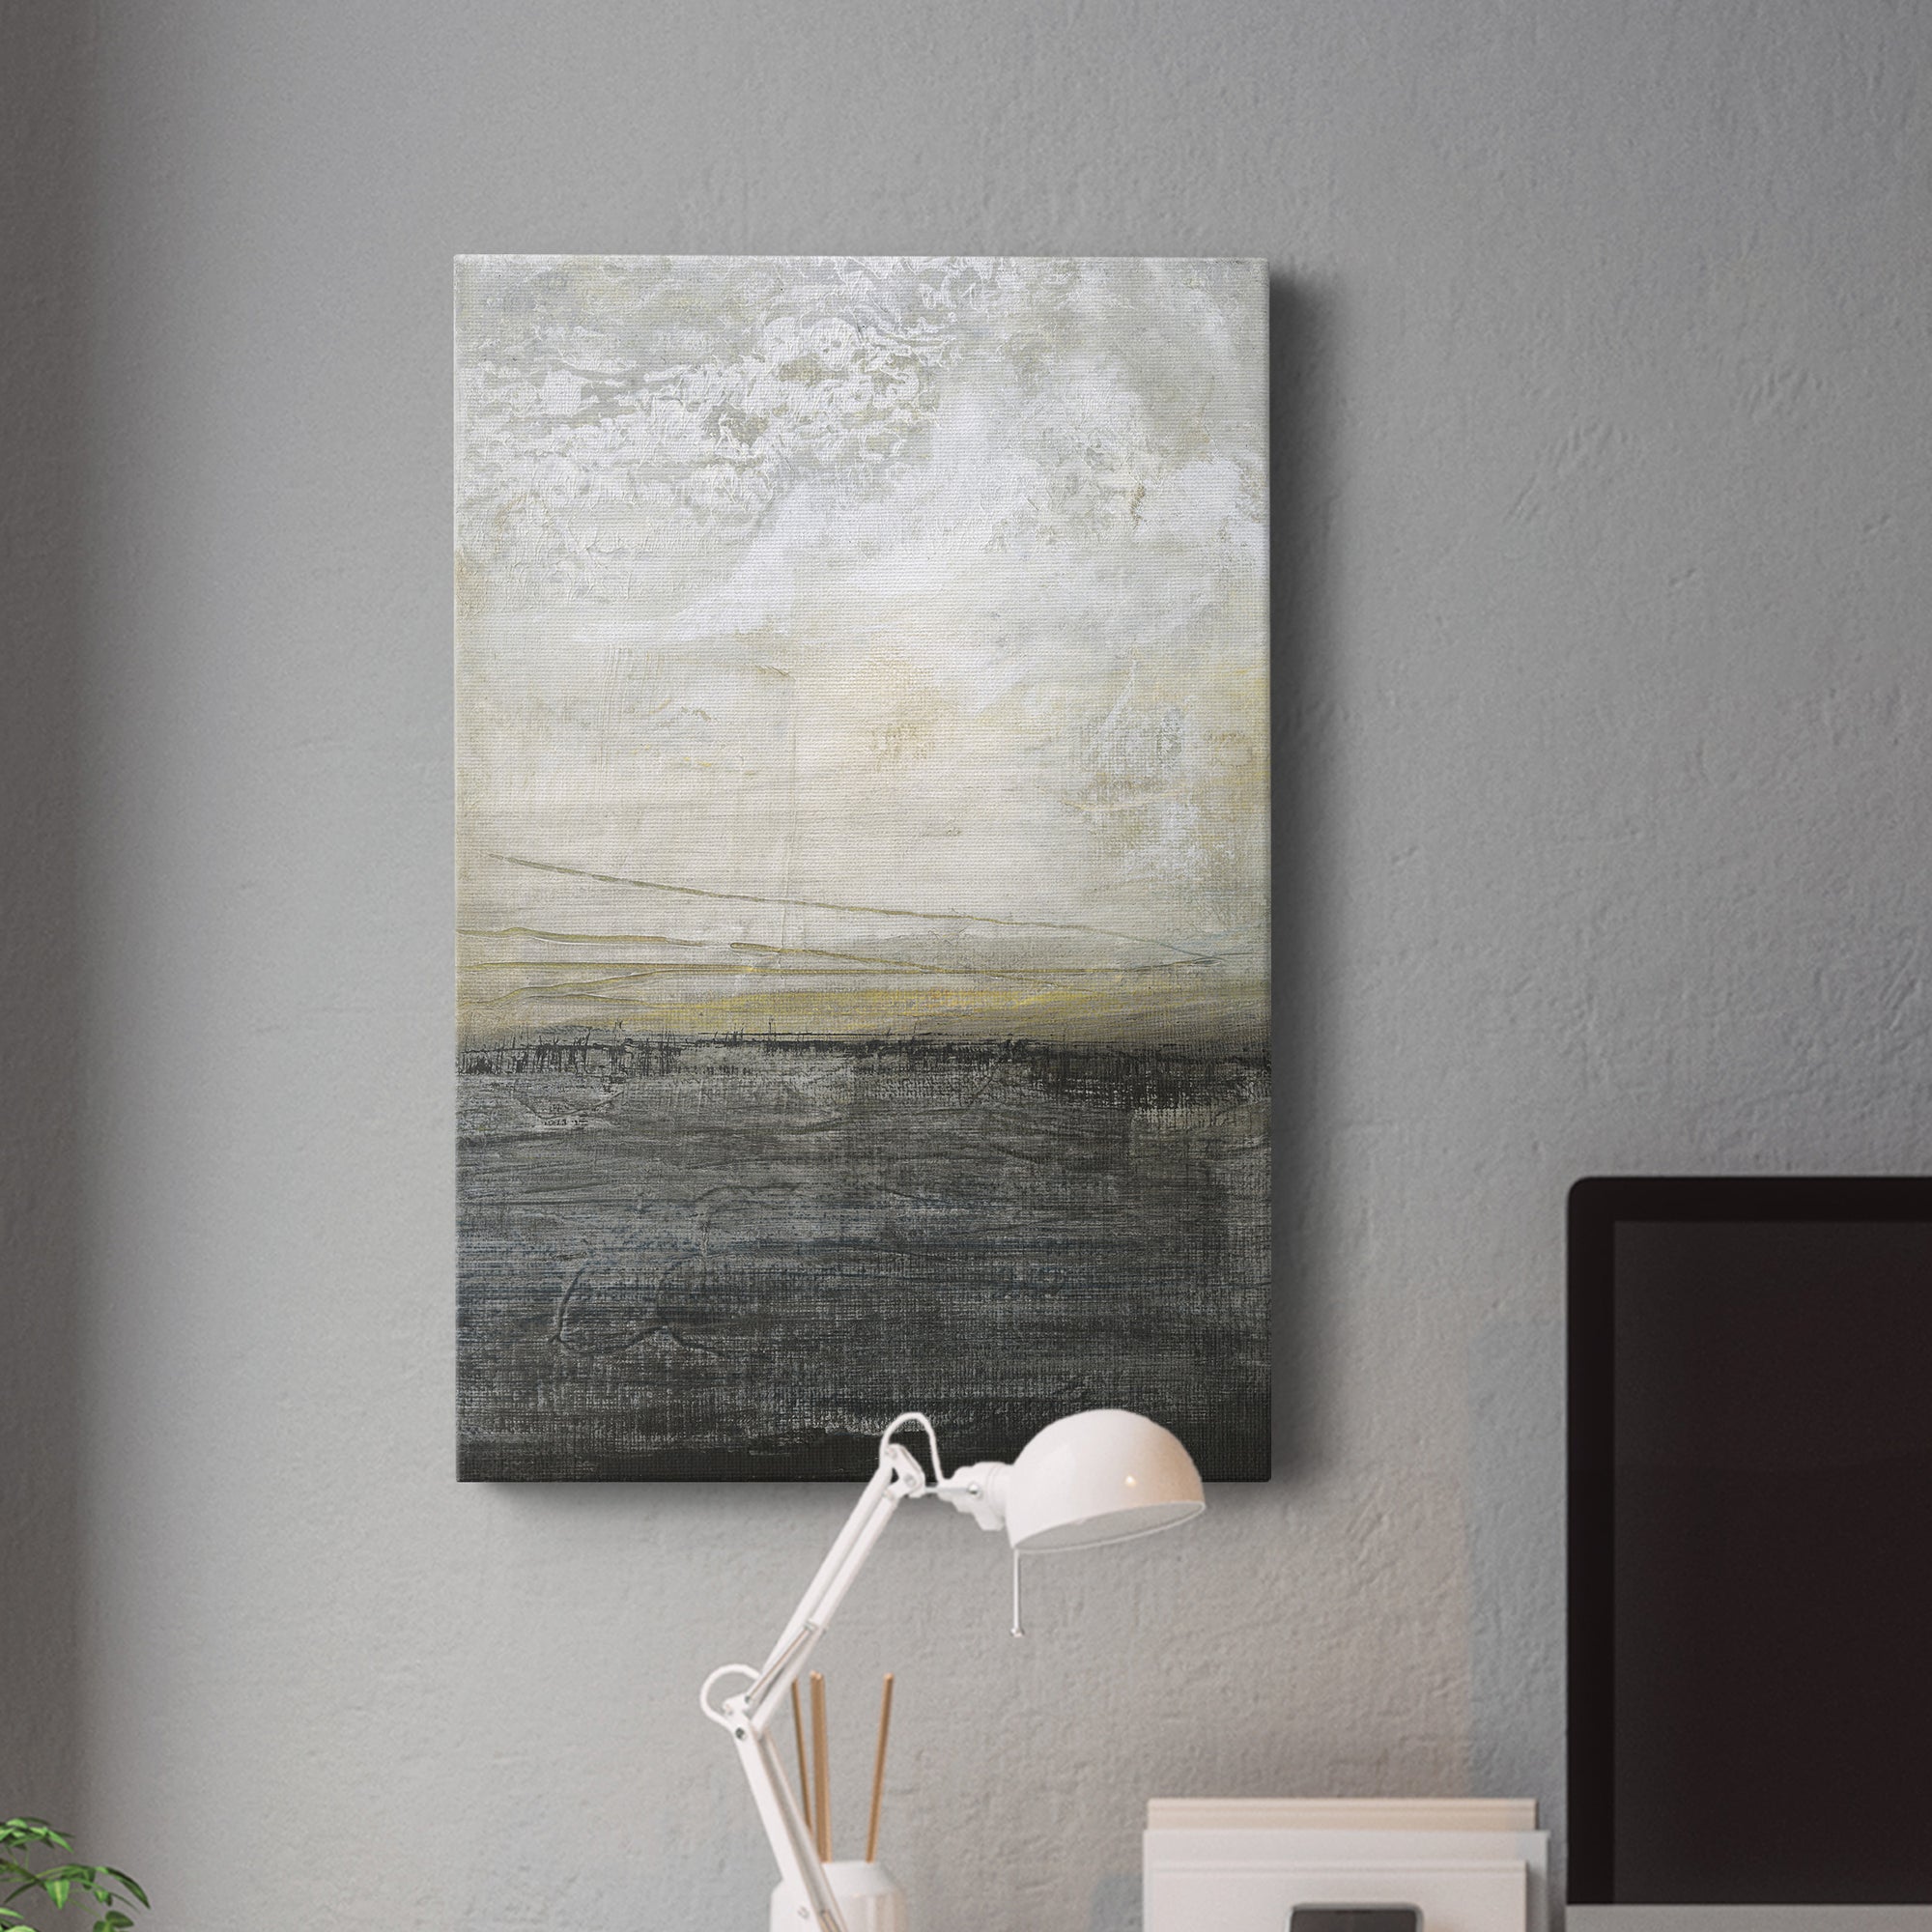 Misty Landscape I Premium Gallery Wrapped Canvas - Ready to Hang